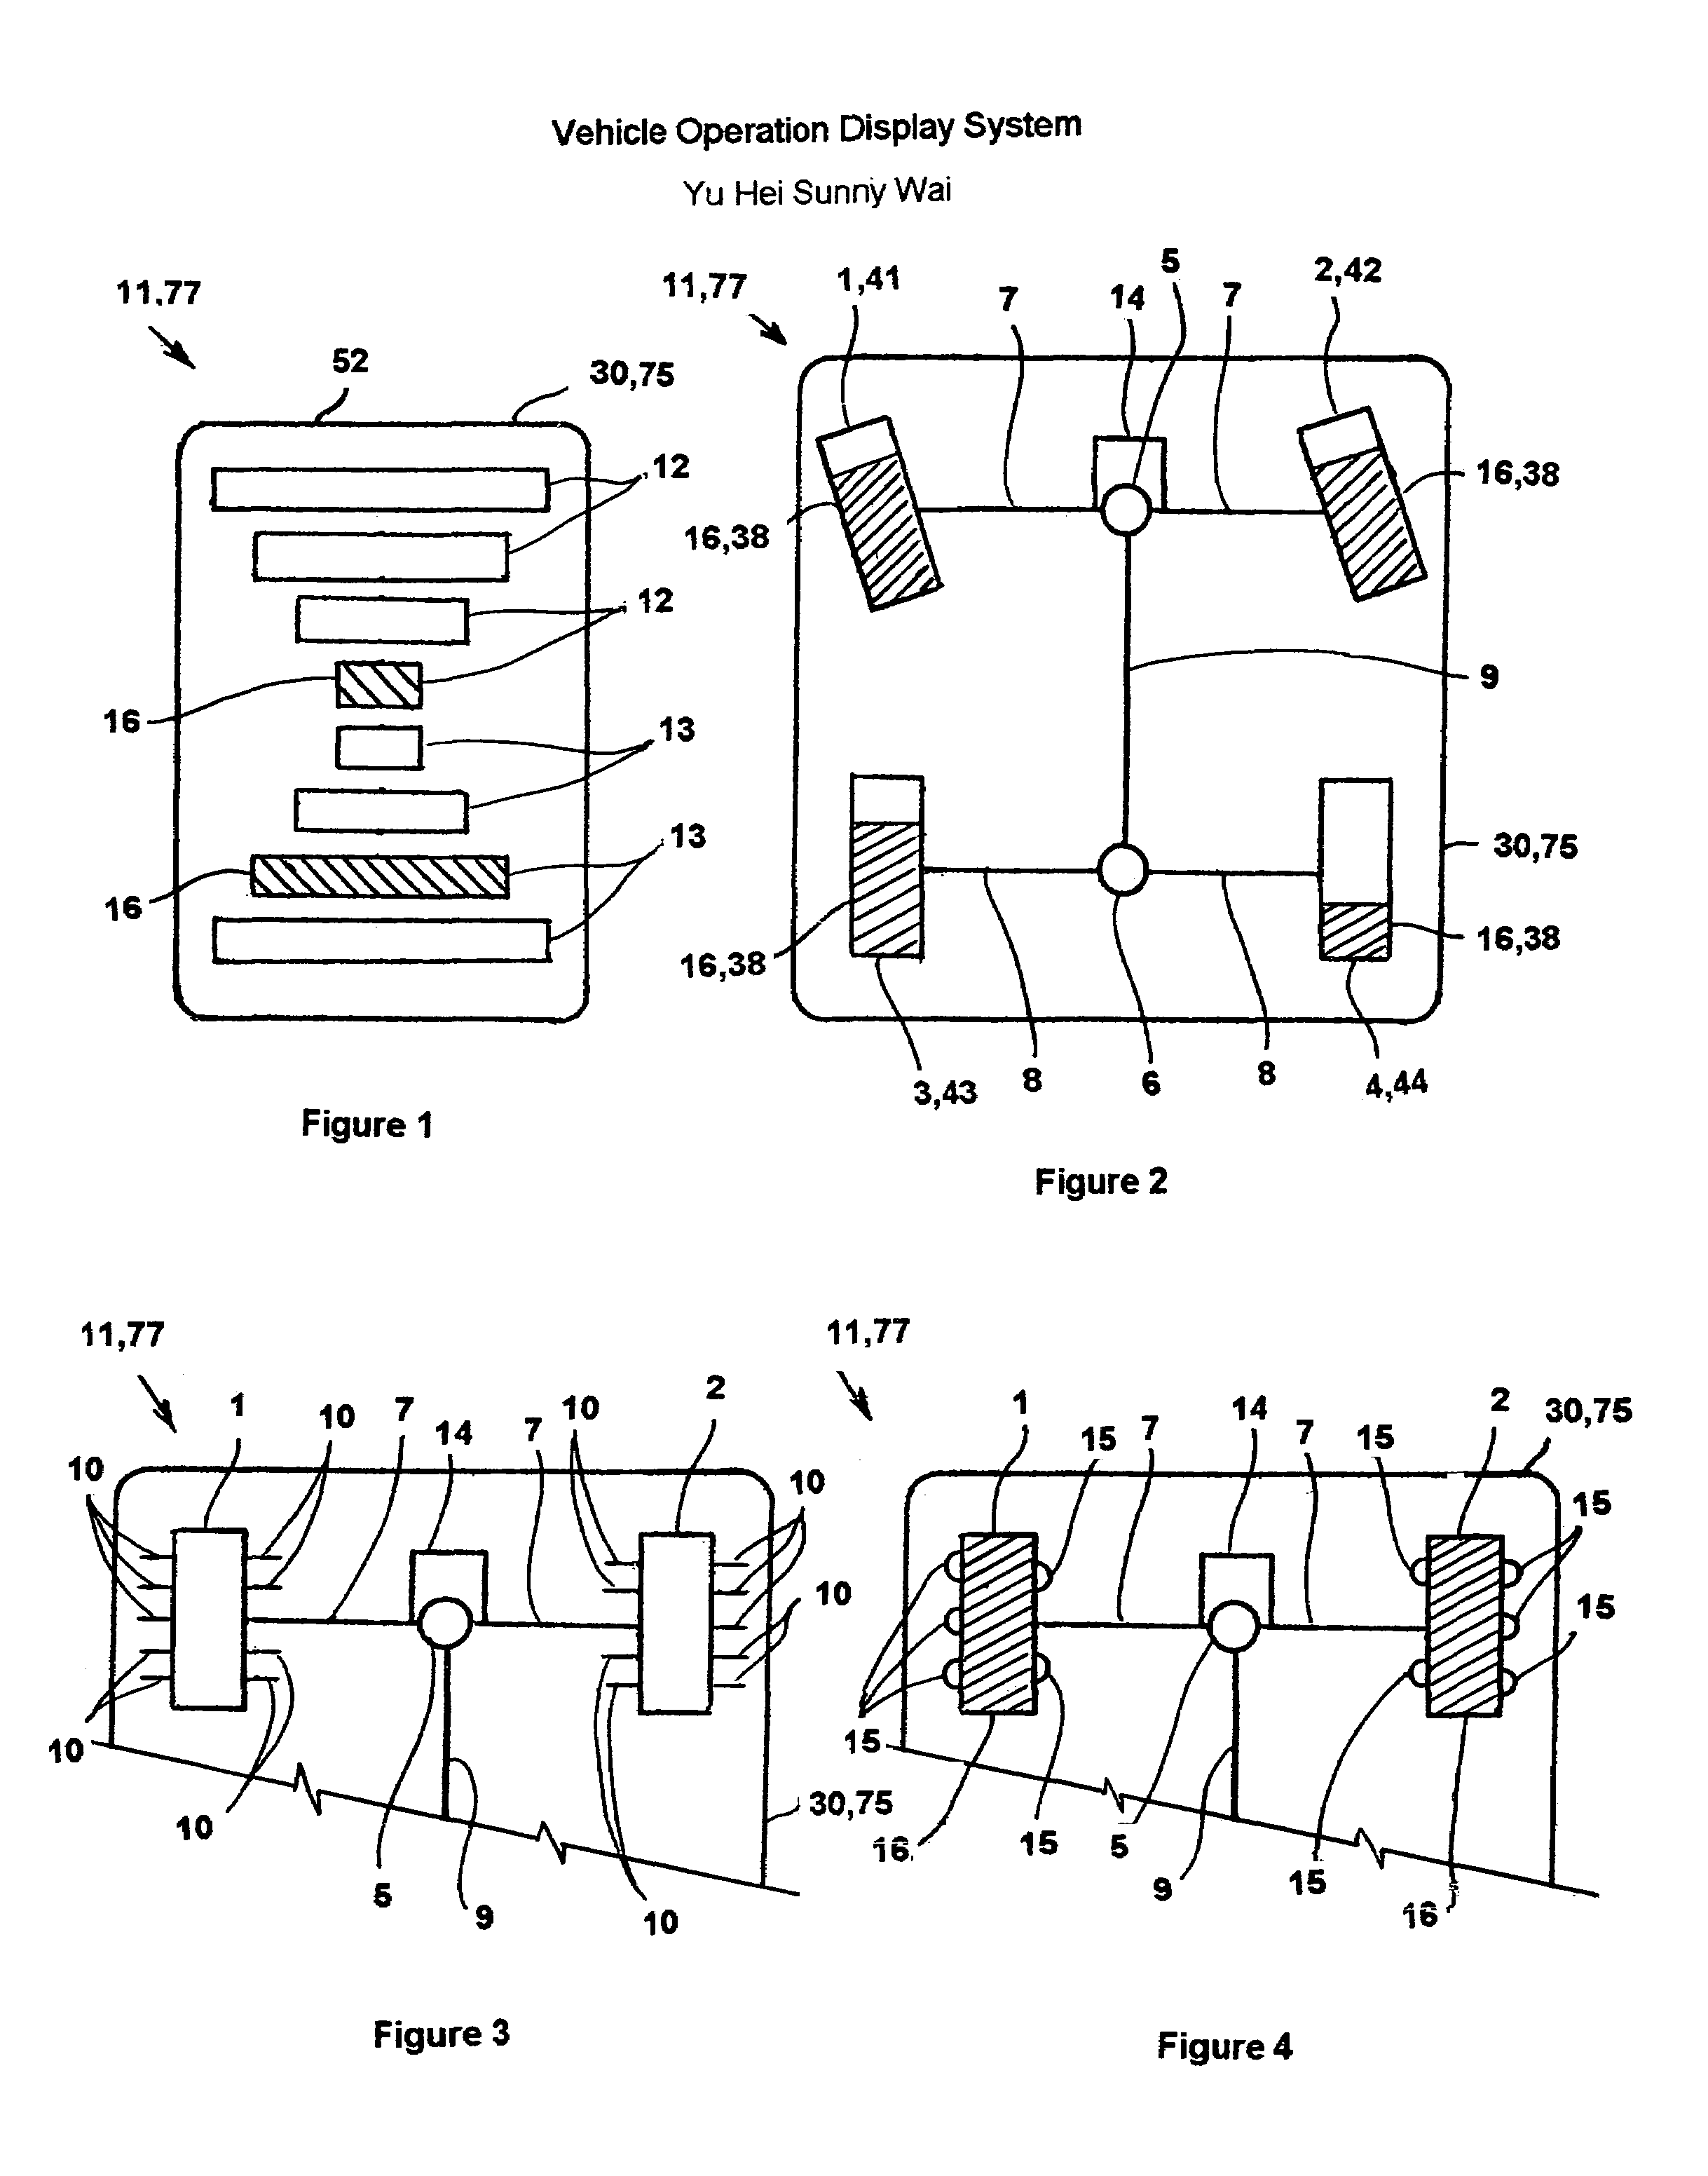 Vehicle operation display system